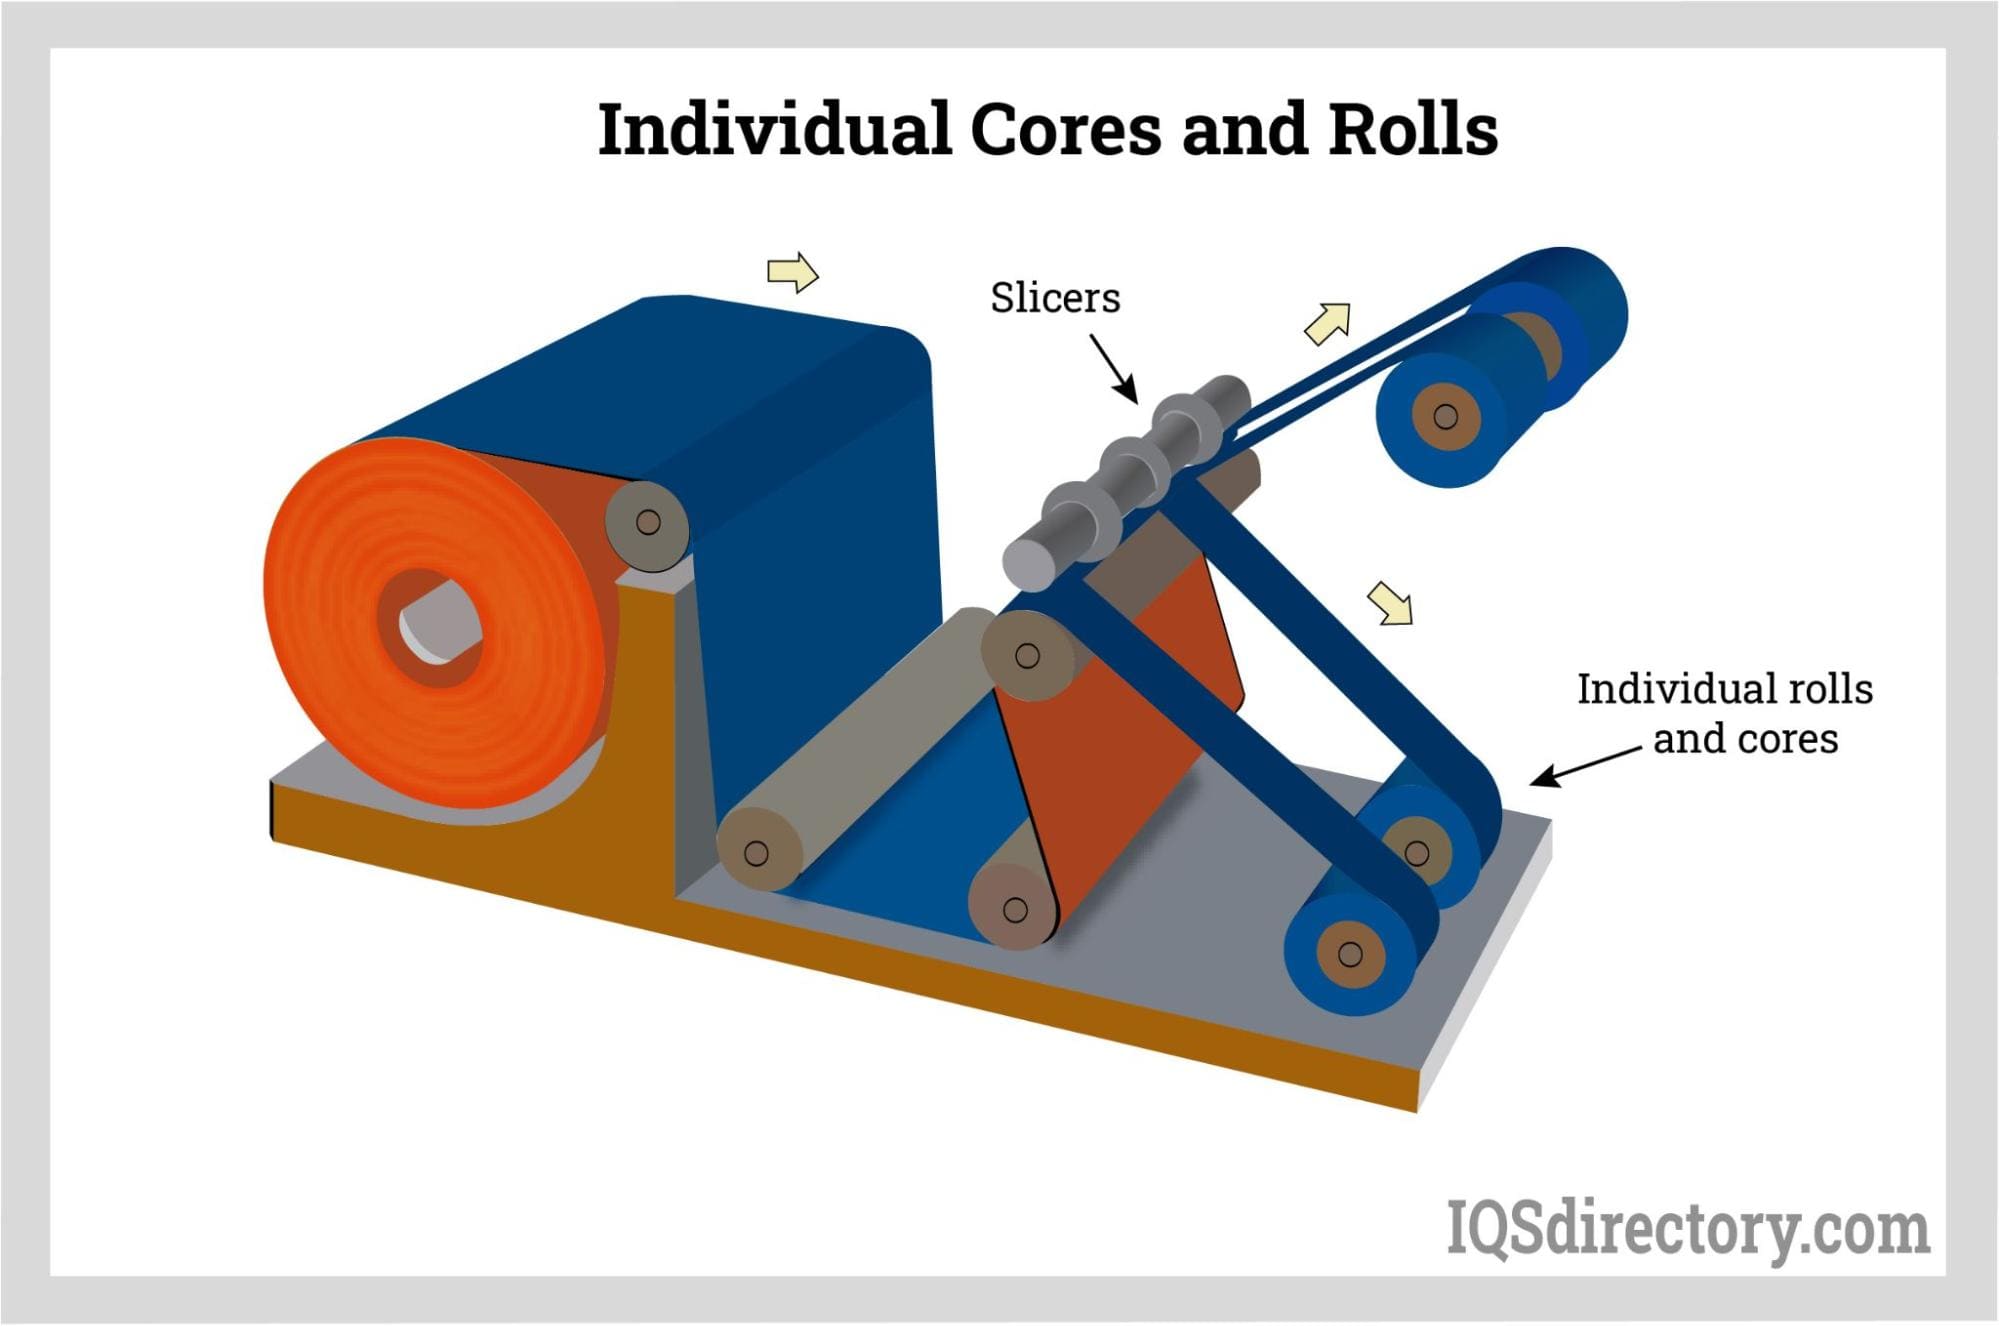 Individual Cores and Rolls